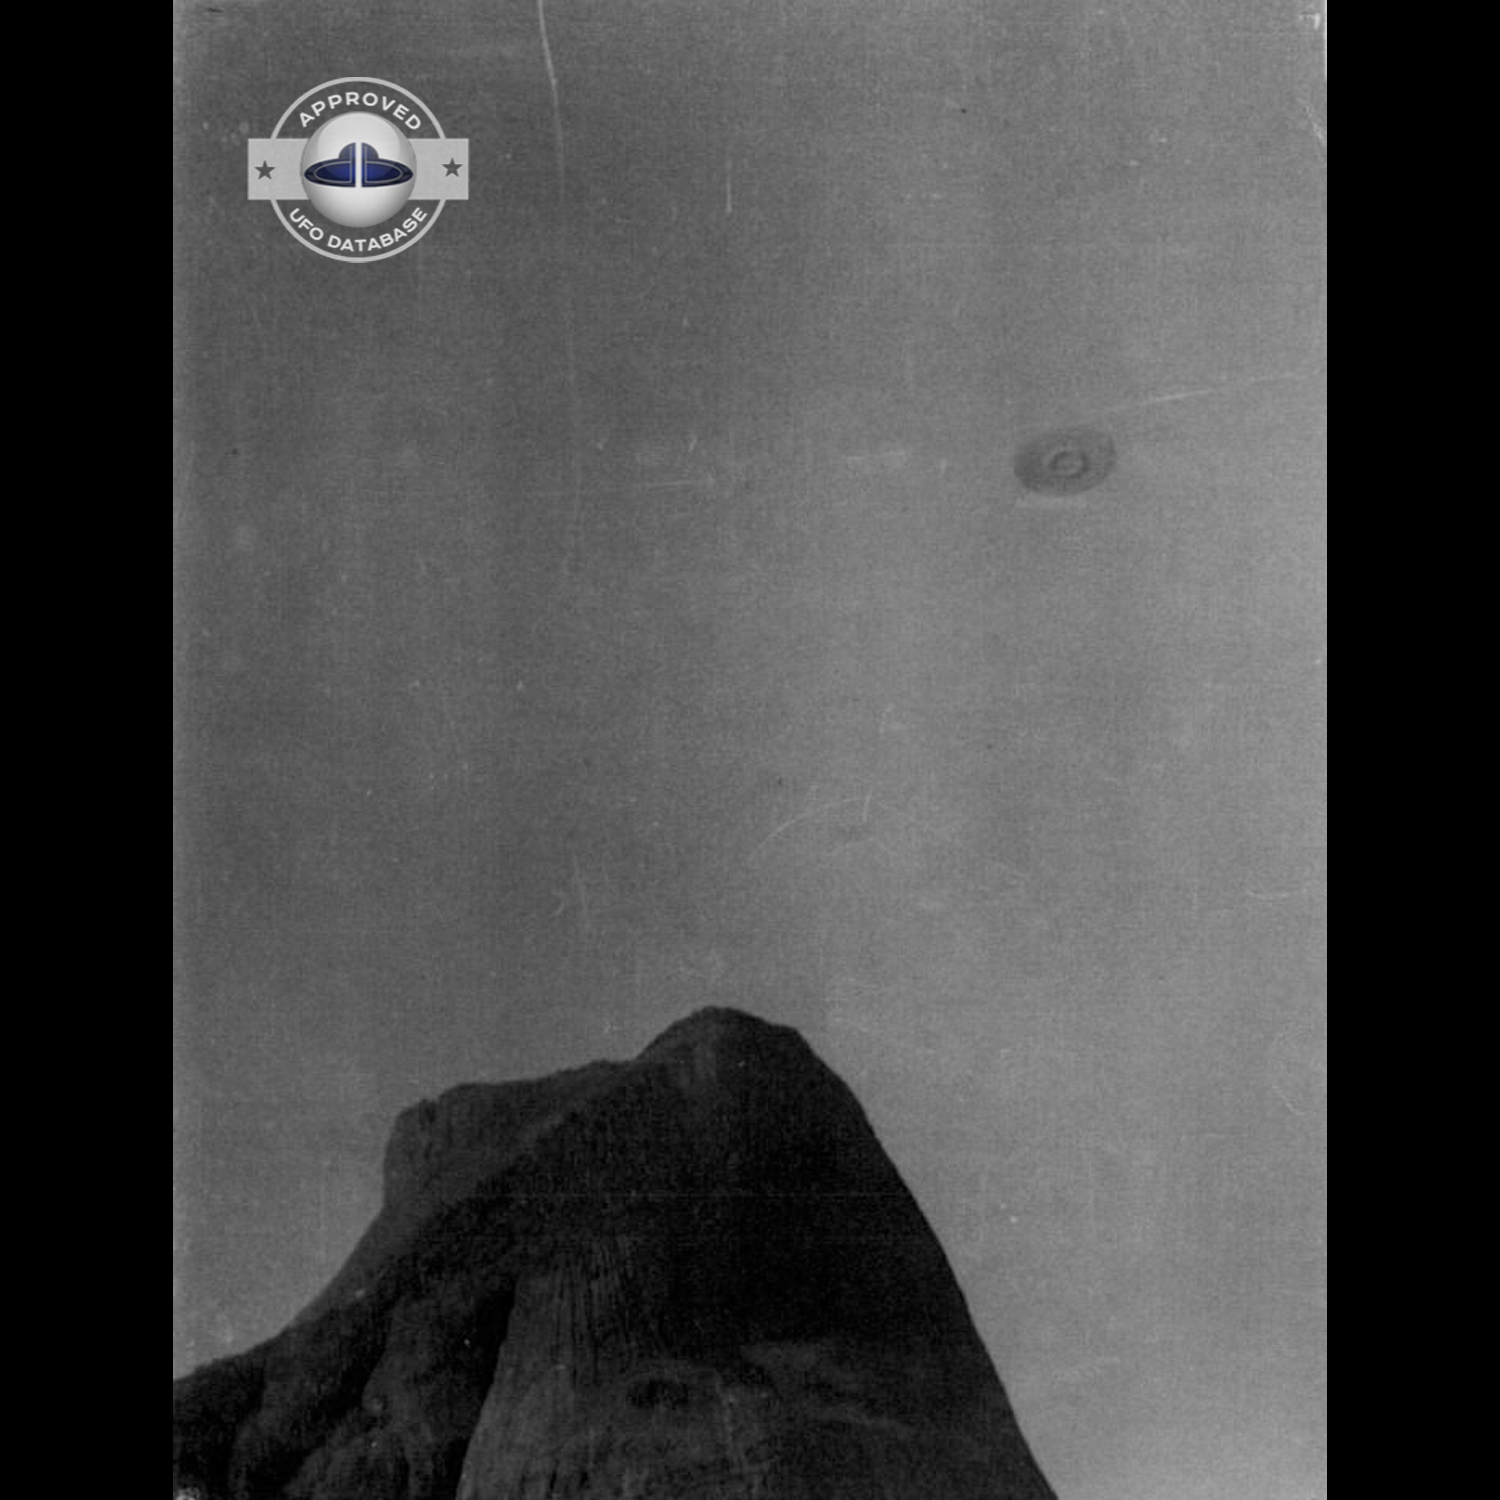 UFO picture considered by A.P.R.O | one of the best ufo picture 1952 UFO Picture #122-2